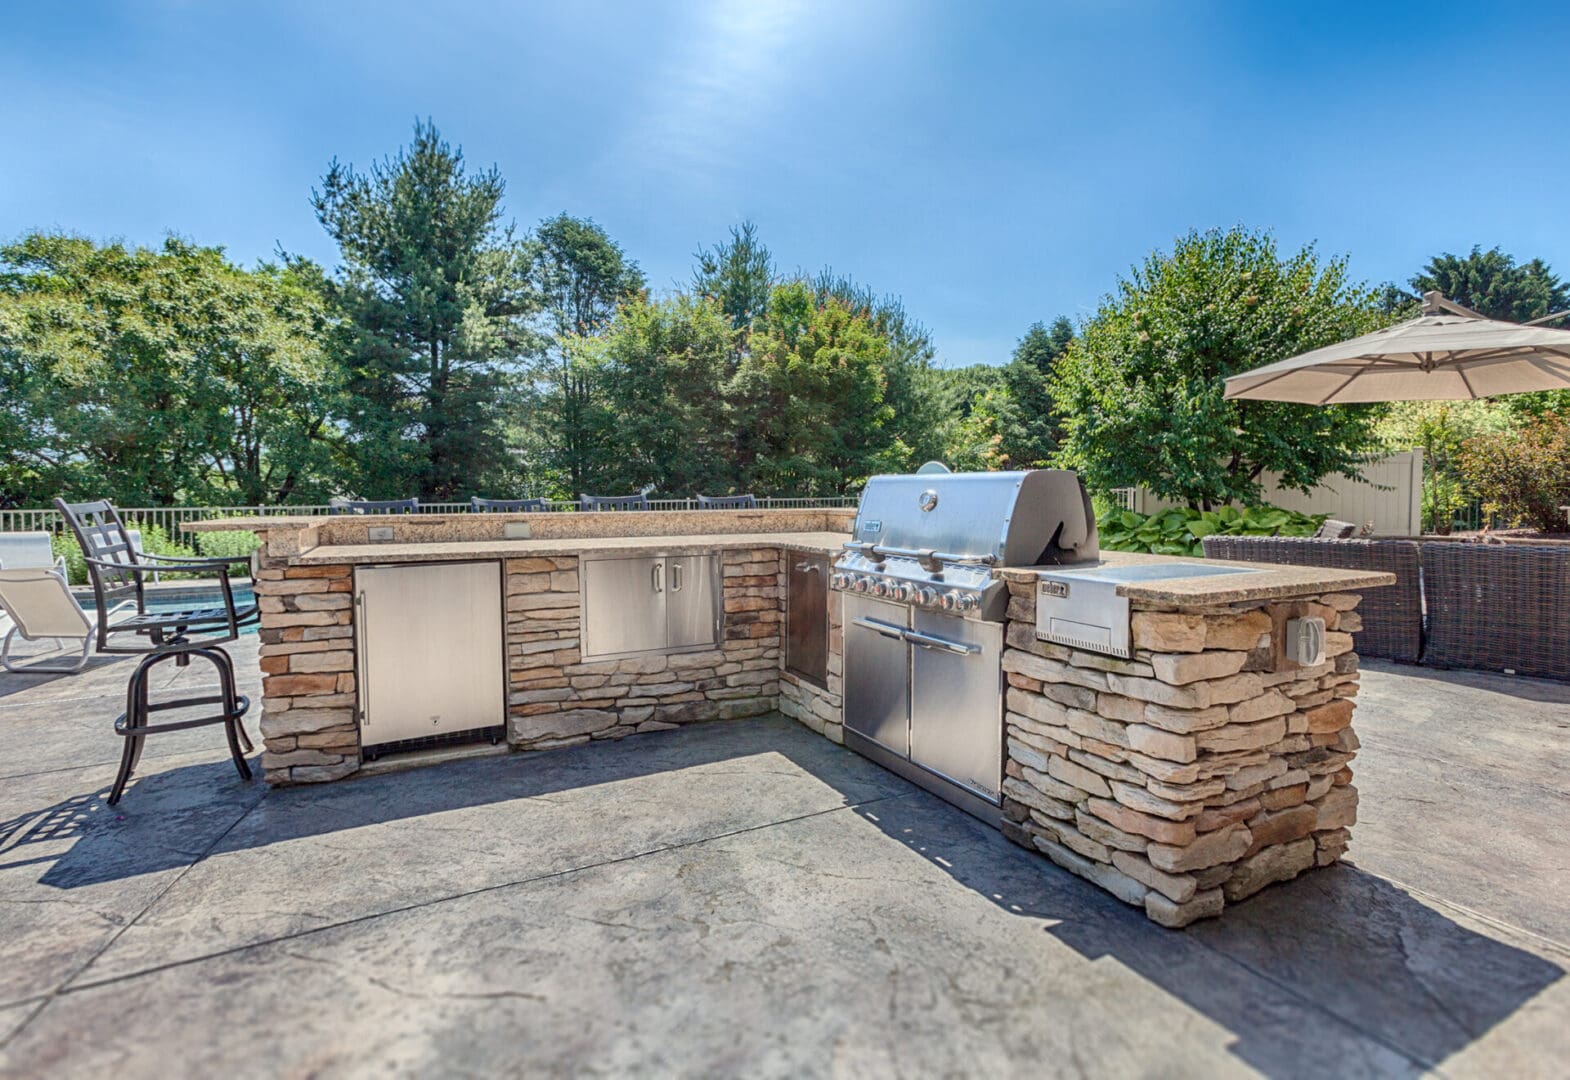 A custom outdoor kitchen with a grill and patio furniture.